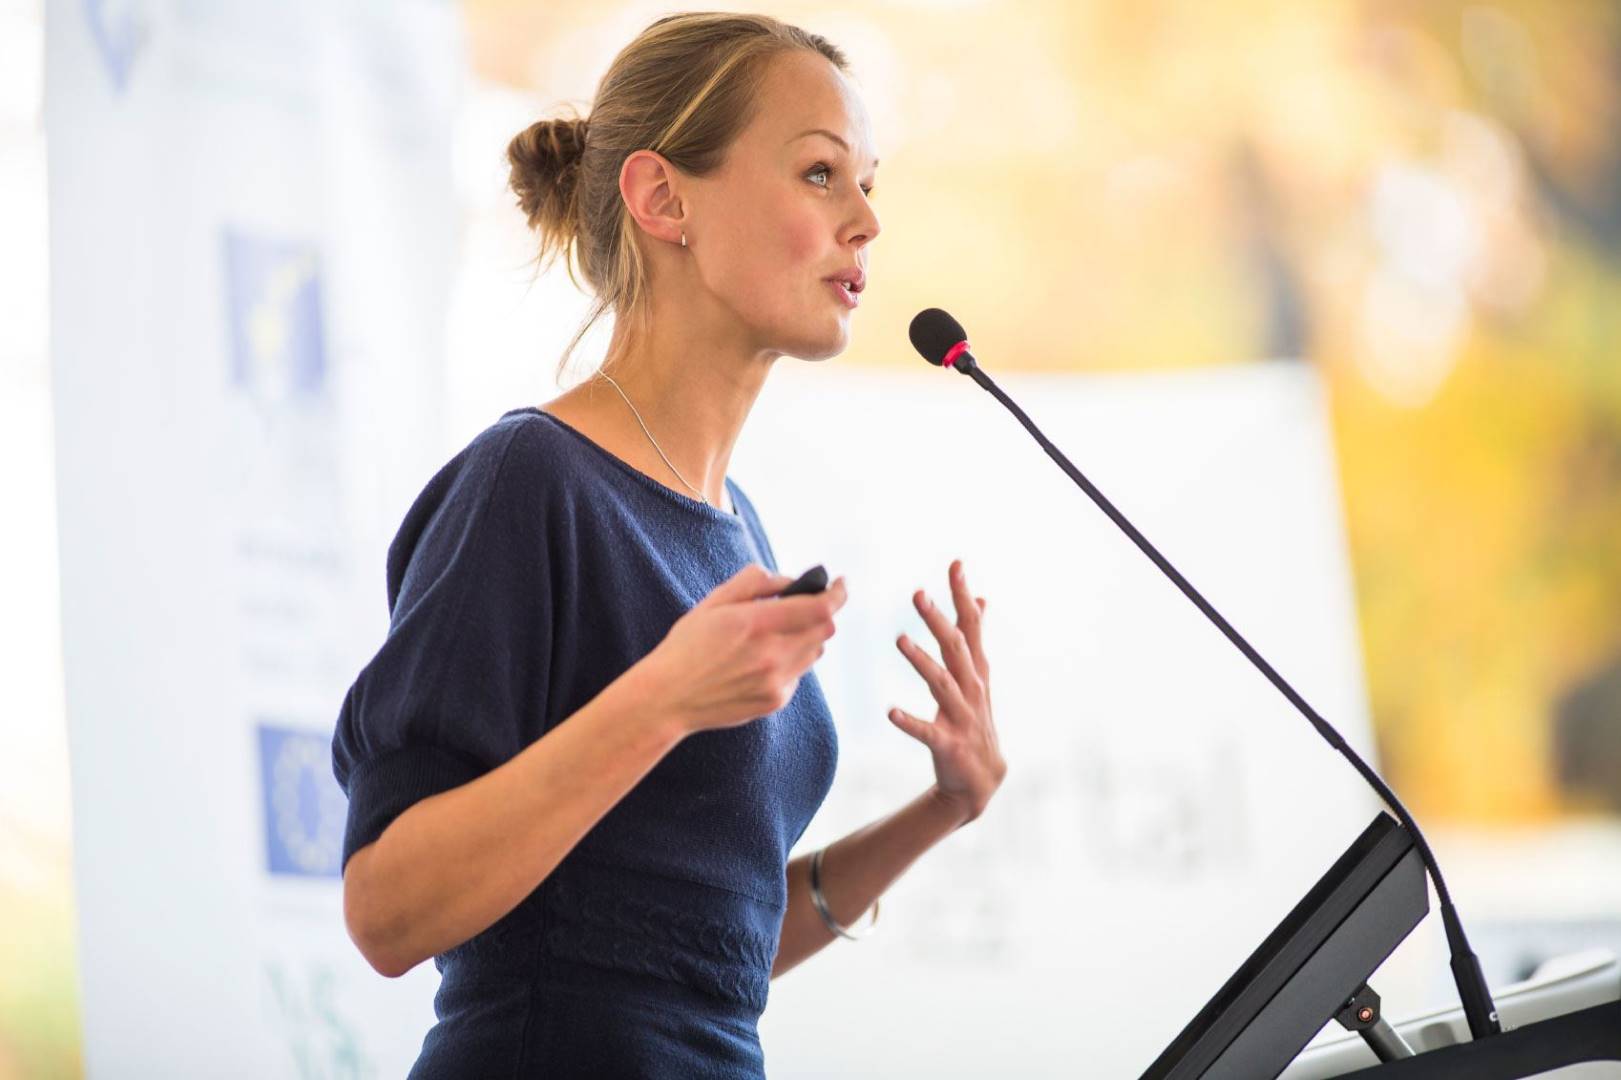 You are currently viewing 17 Rostrum WA Public Speaking Tips to Improve your Next Presentation